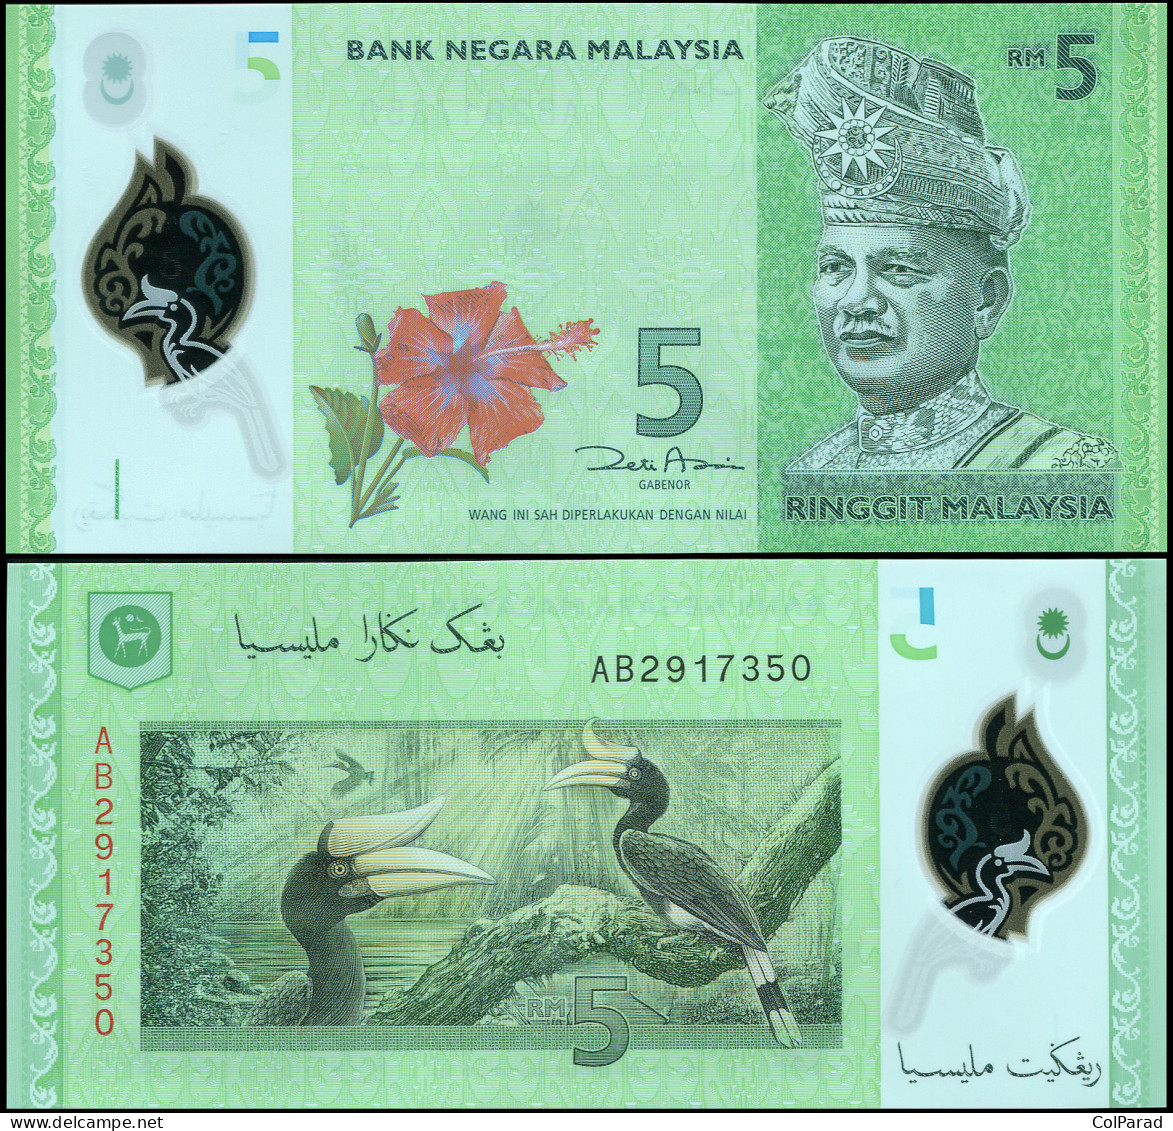 MALAYSIA 5 RINGGIT - ND (2012) - Polymer Unc - P.52a Banknote - Malaysie